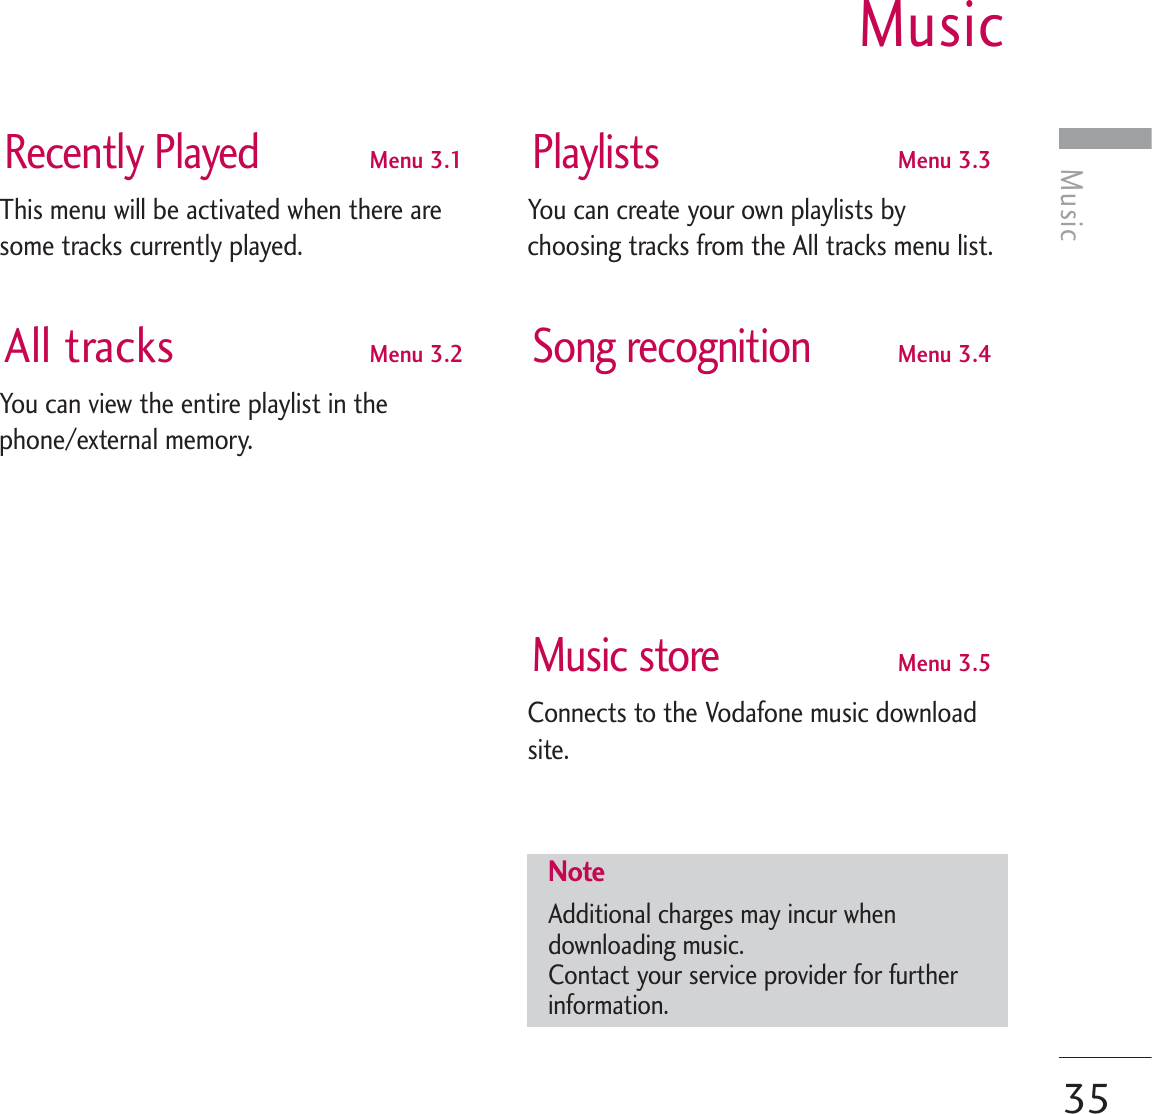 MusicMusic35Recently PlayedMenu 3.1This menu will be activated when there aresome tracks currently played.All tracks Menu 3.2You can view the entire playlist in thephone/external memory.PlaylistsMenu 3.3You can create your own playlists bychoosing tracks from the All tracks menu list.Song recognitionMenu 3.4Music storeMenu 3.5Connects to the Vodafone music downloadsite.NoteAdditional charges may incur whendownloading music.Contact your service provider for furtherinformation.